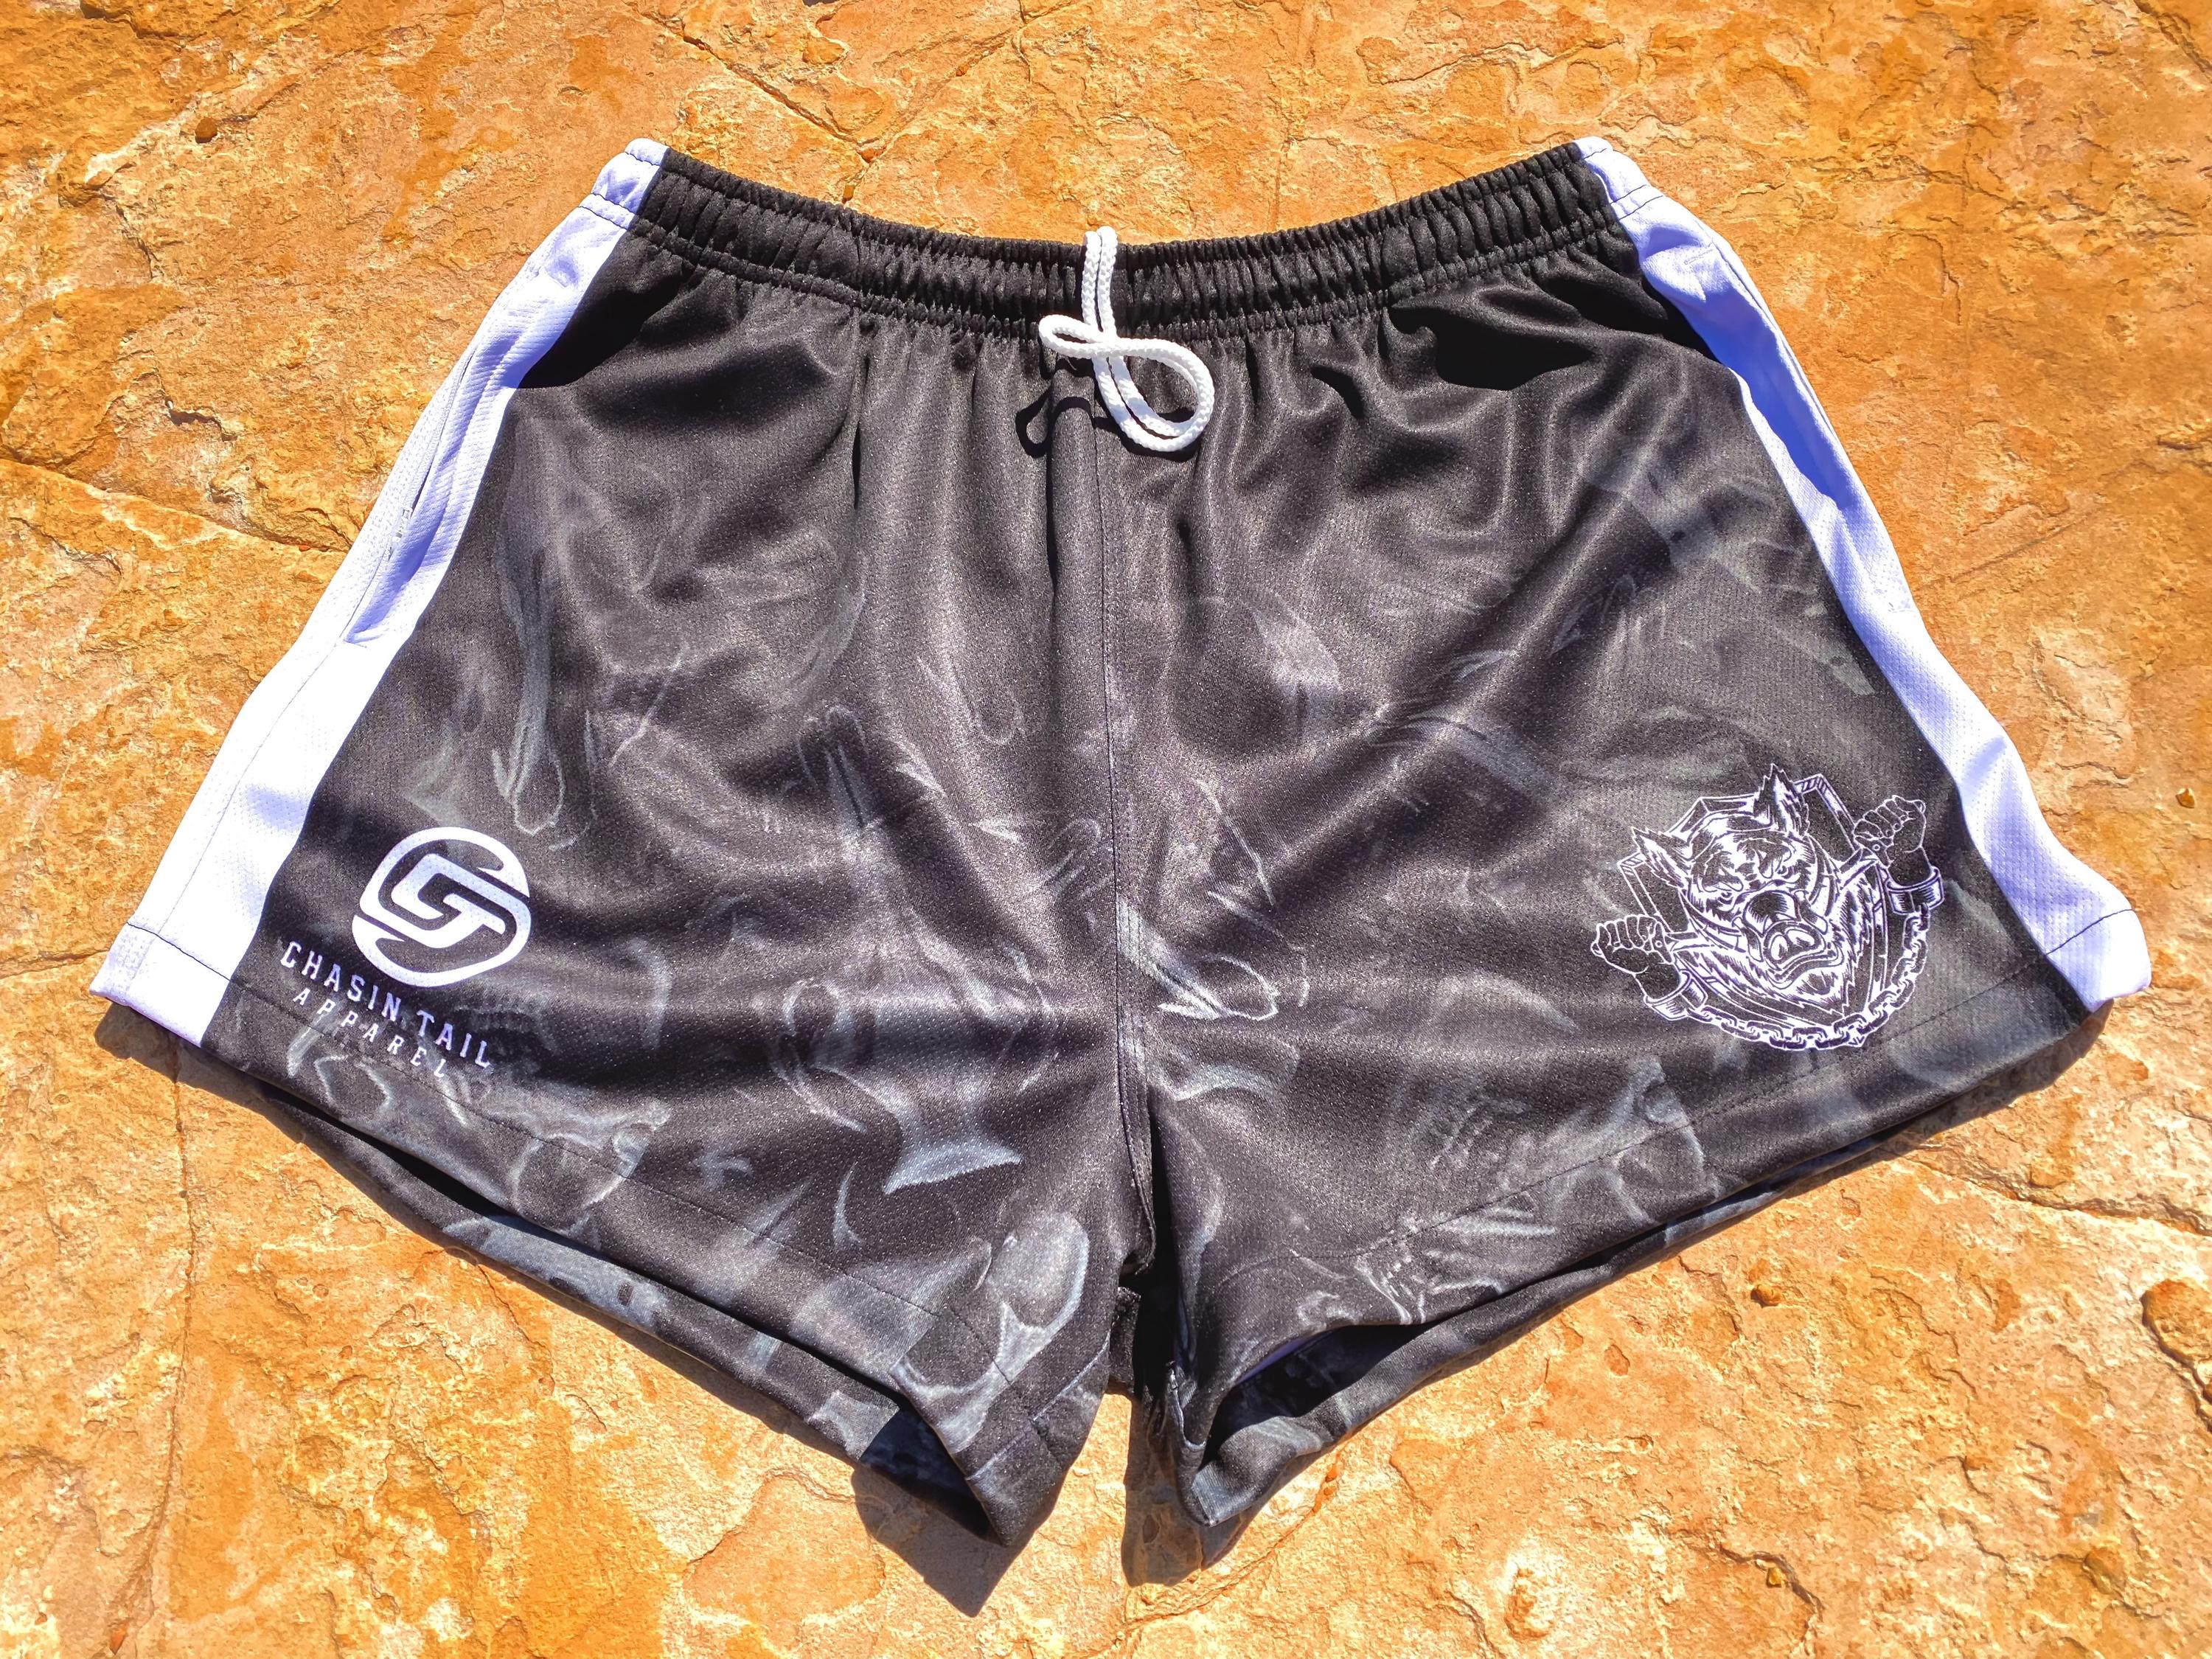 Chasin Tail -  Pig Skull Footy Shorts - Complete With Pockets And Zipper.